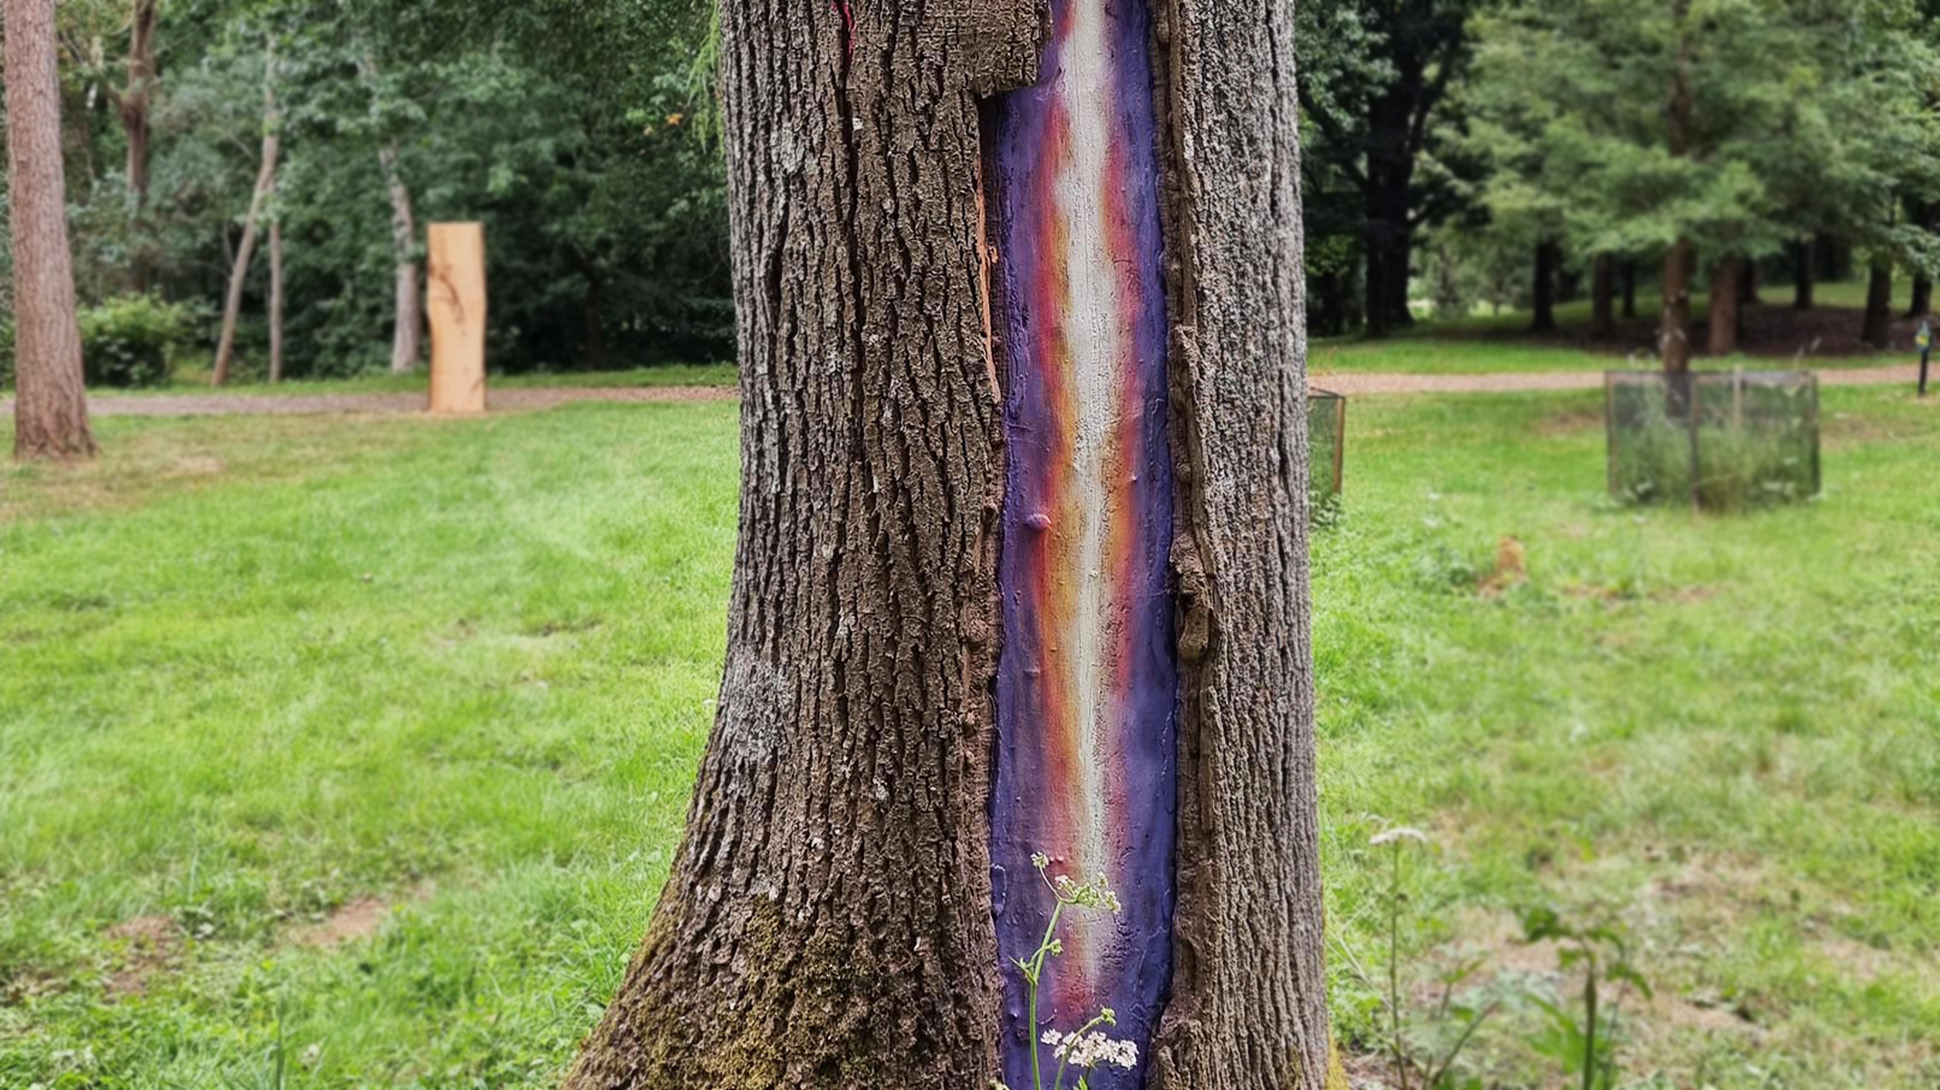 The trunk of an ash tree, with painted colours in a gap between the bark